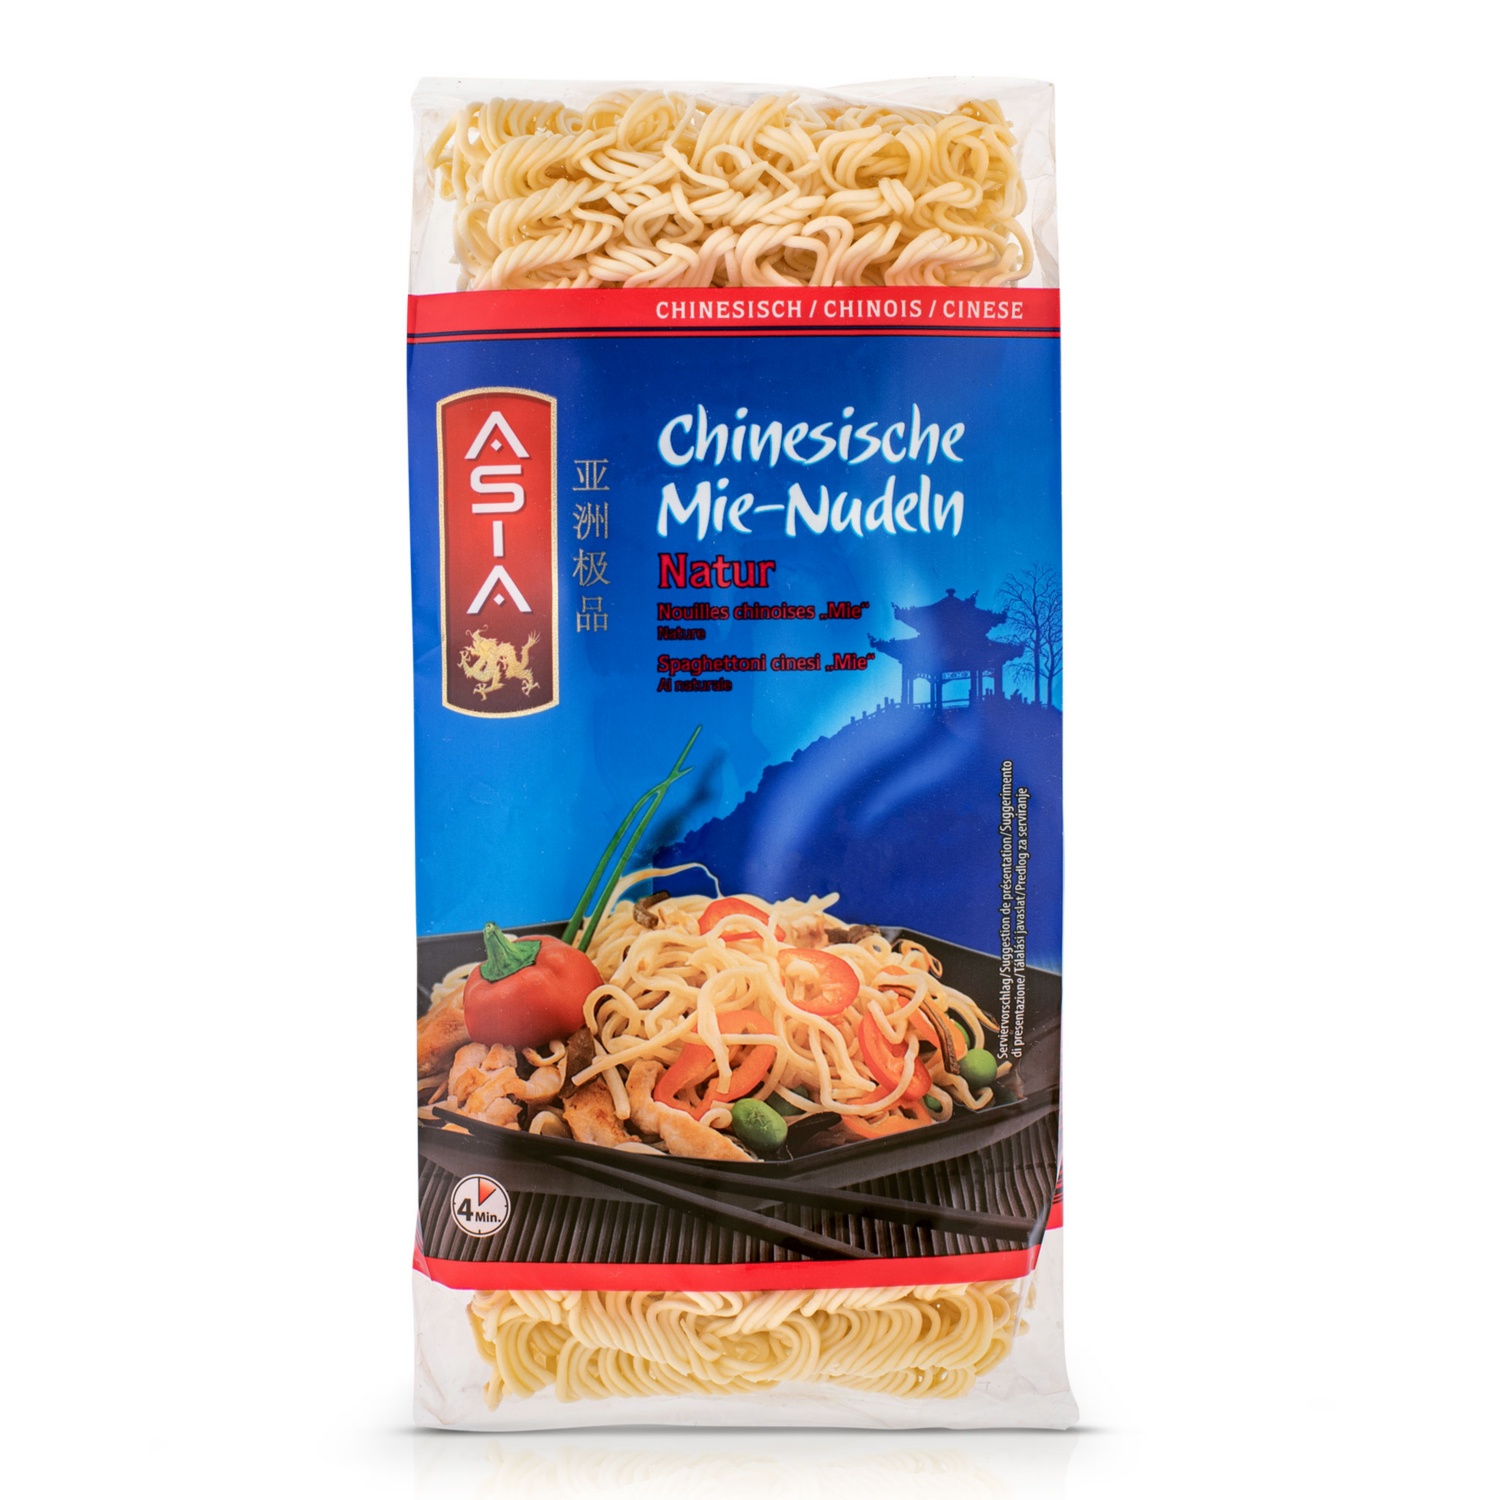 ASIA Mie-Nudeln, Natur